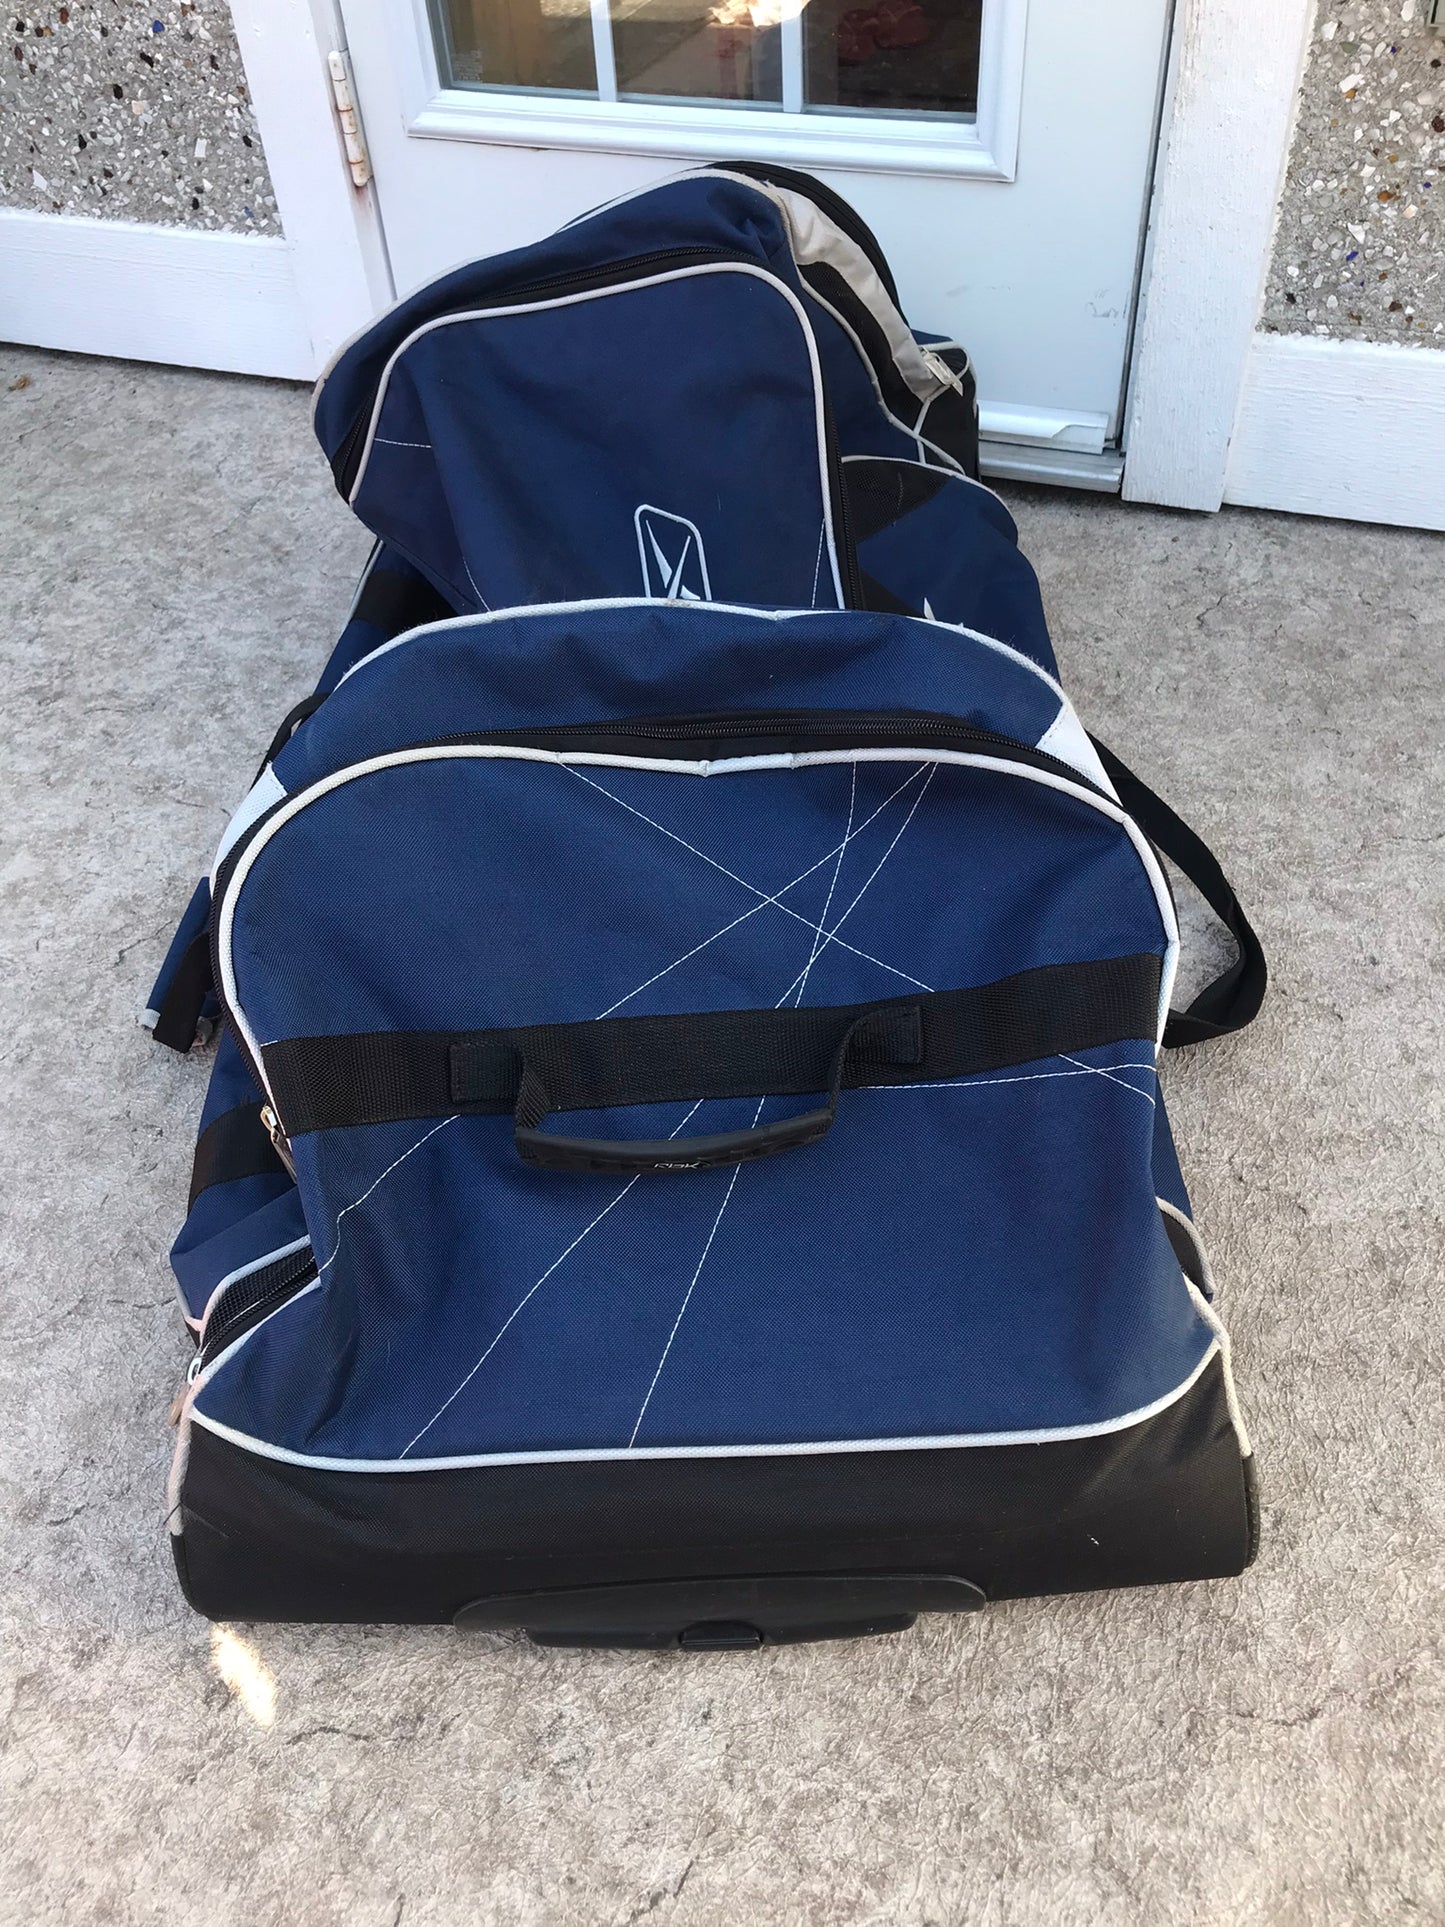 Hockey Bag Men's X Large On Wheels RBC All Zippers Complete With All Straps Denim Blue